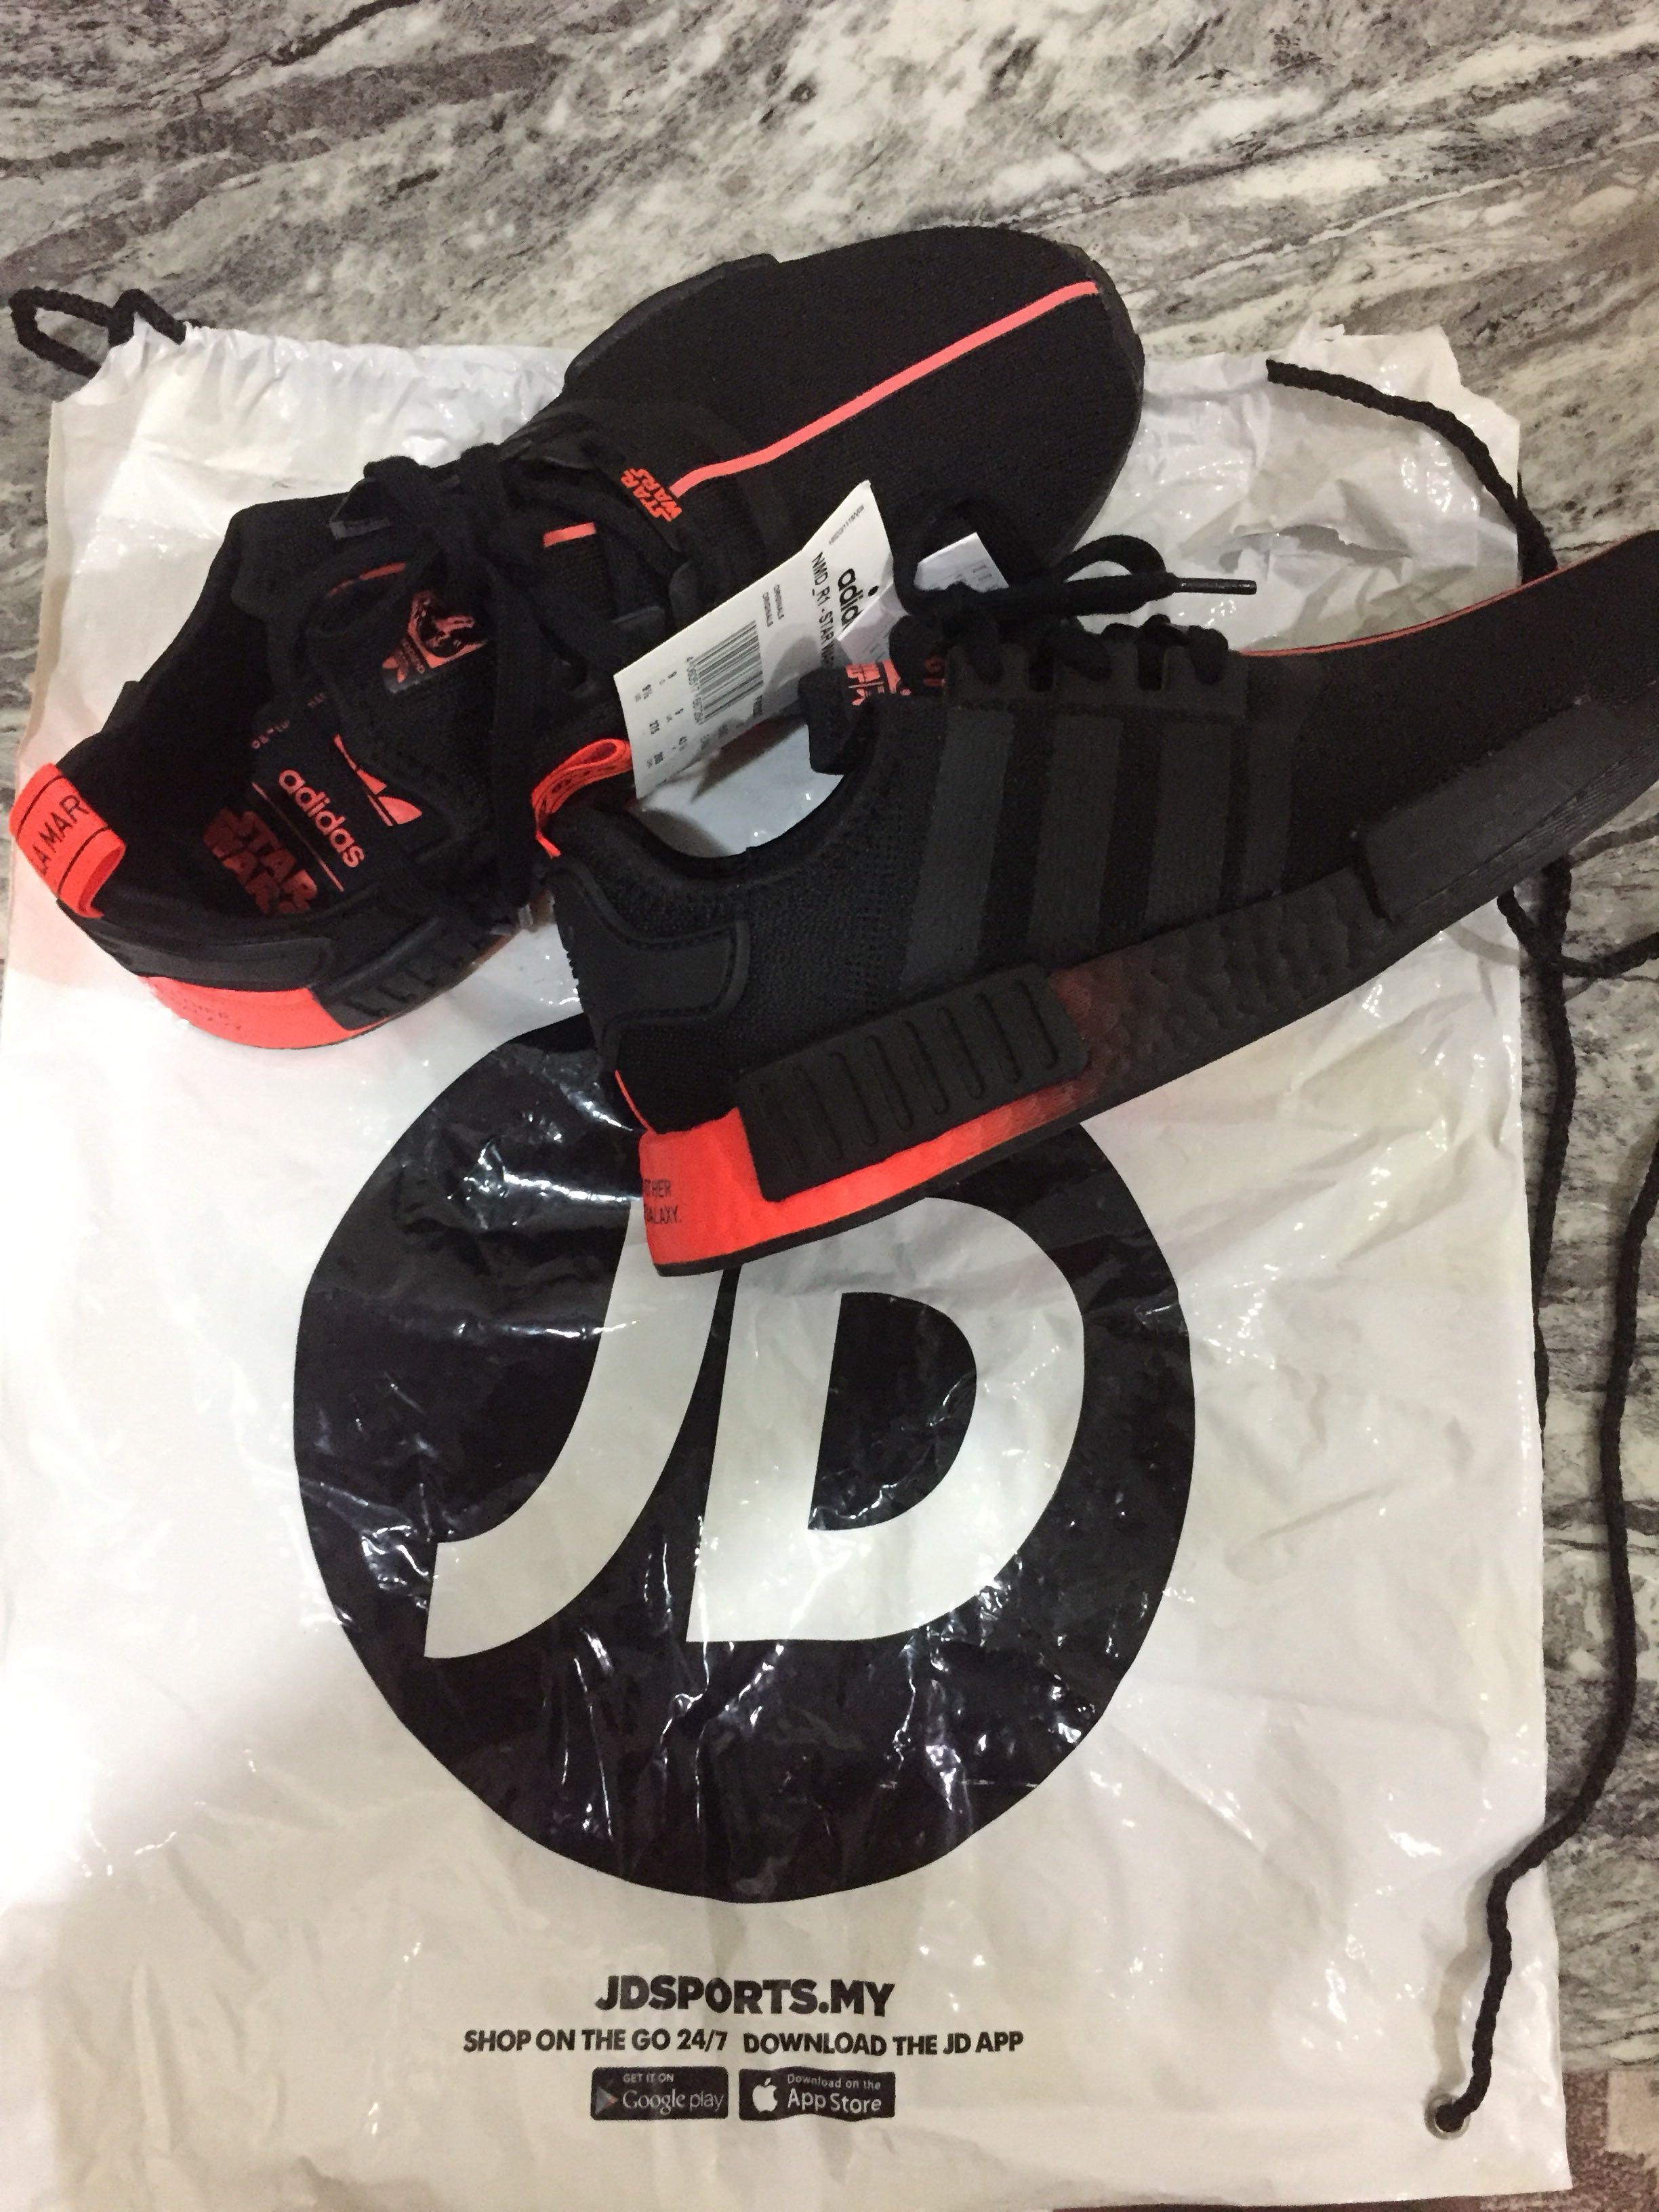 adidas Originals NMD R1 Trainers for Men for sale on ebay